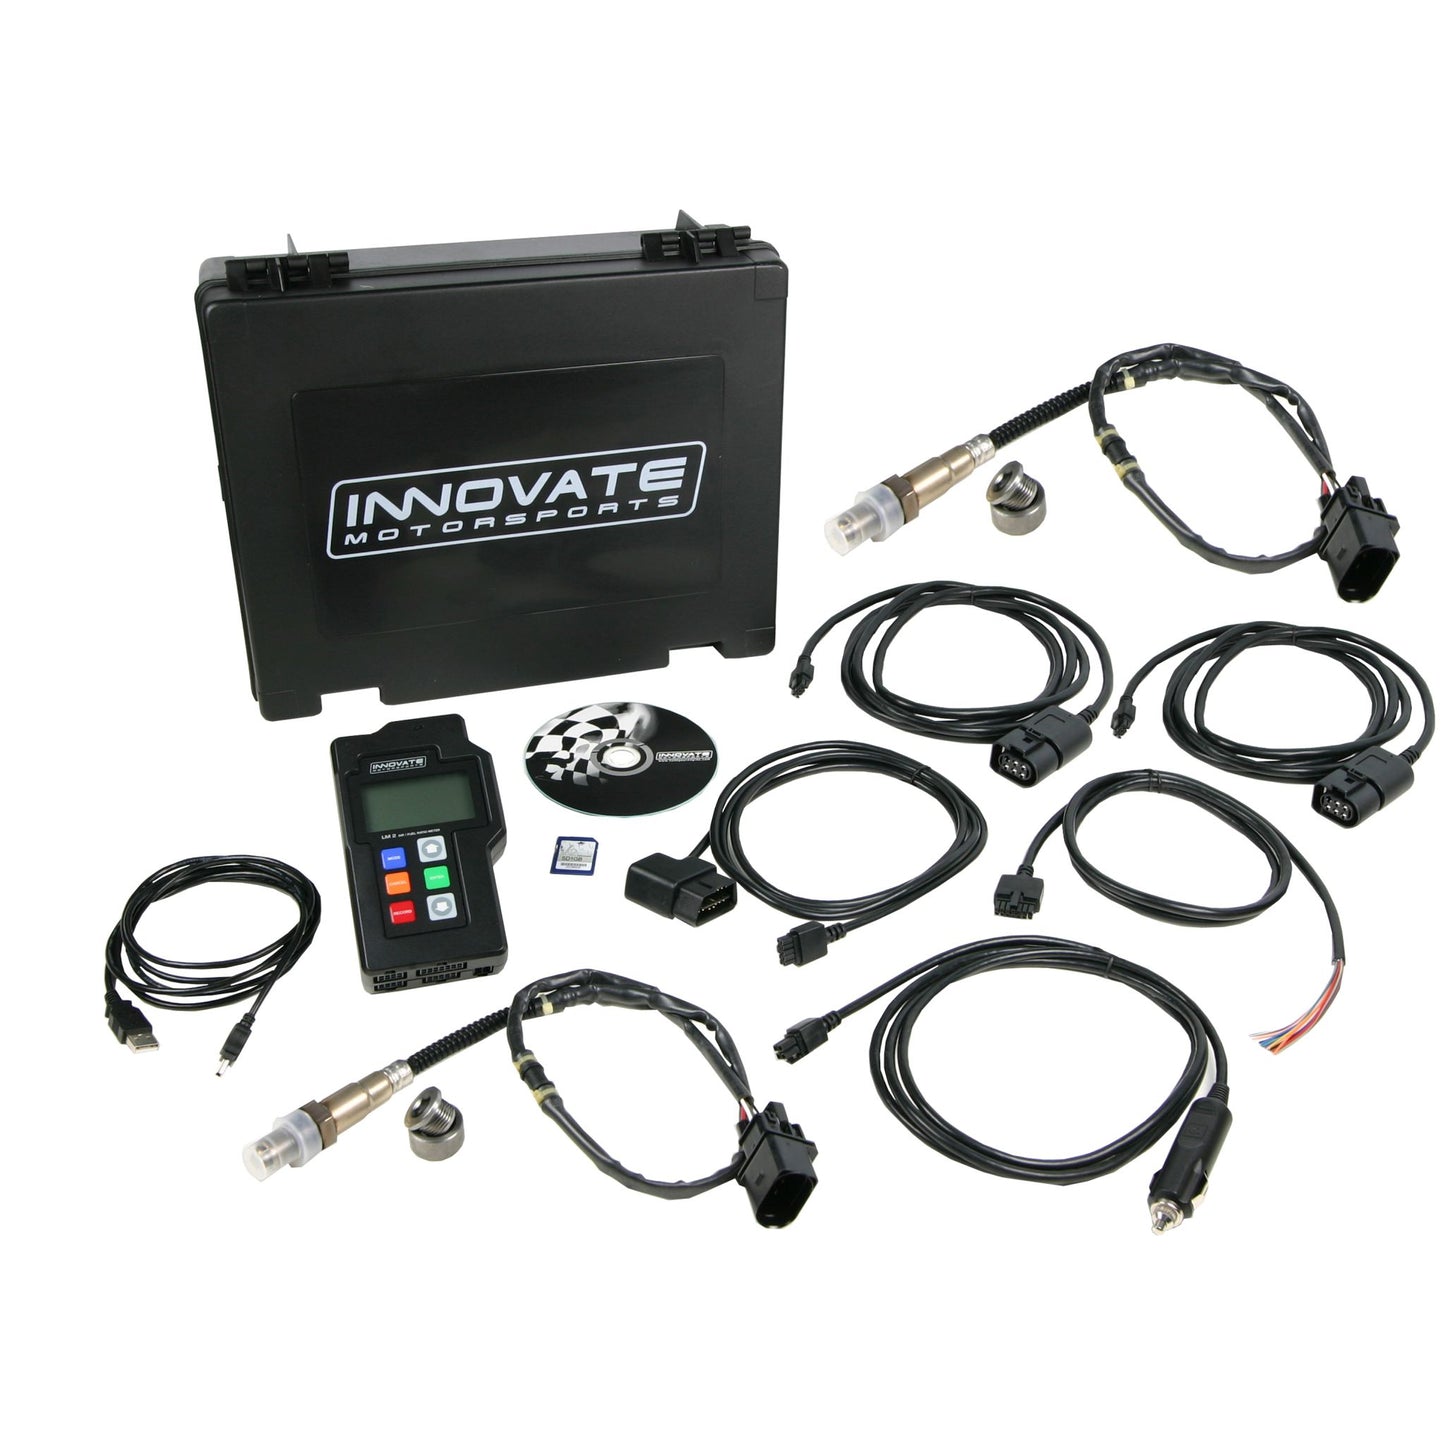 Innovate Motorsports LM-2 Dual 'COMPLETE' Kit 38070